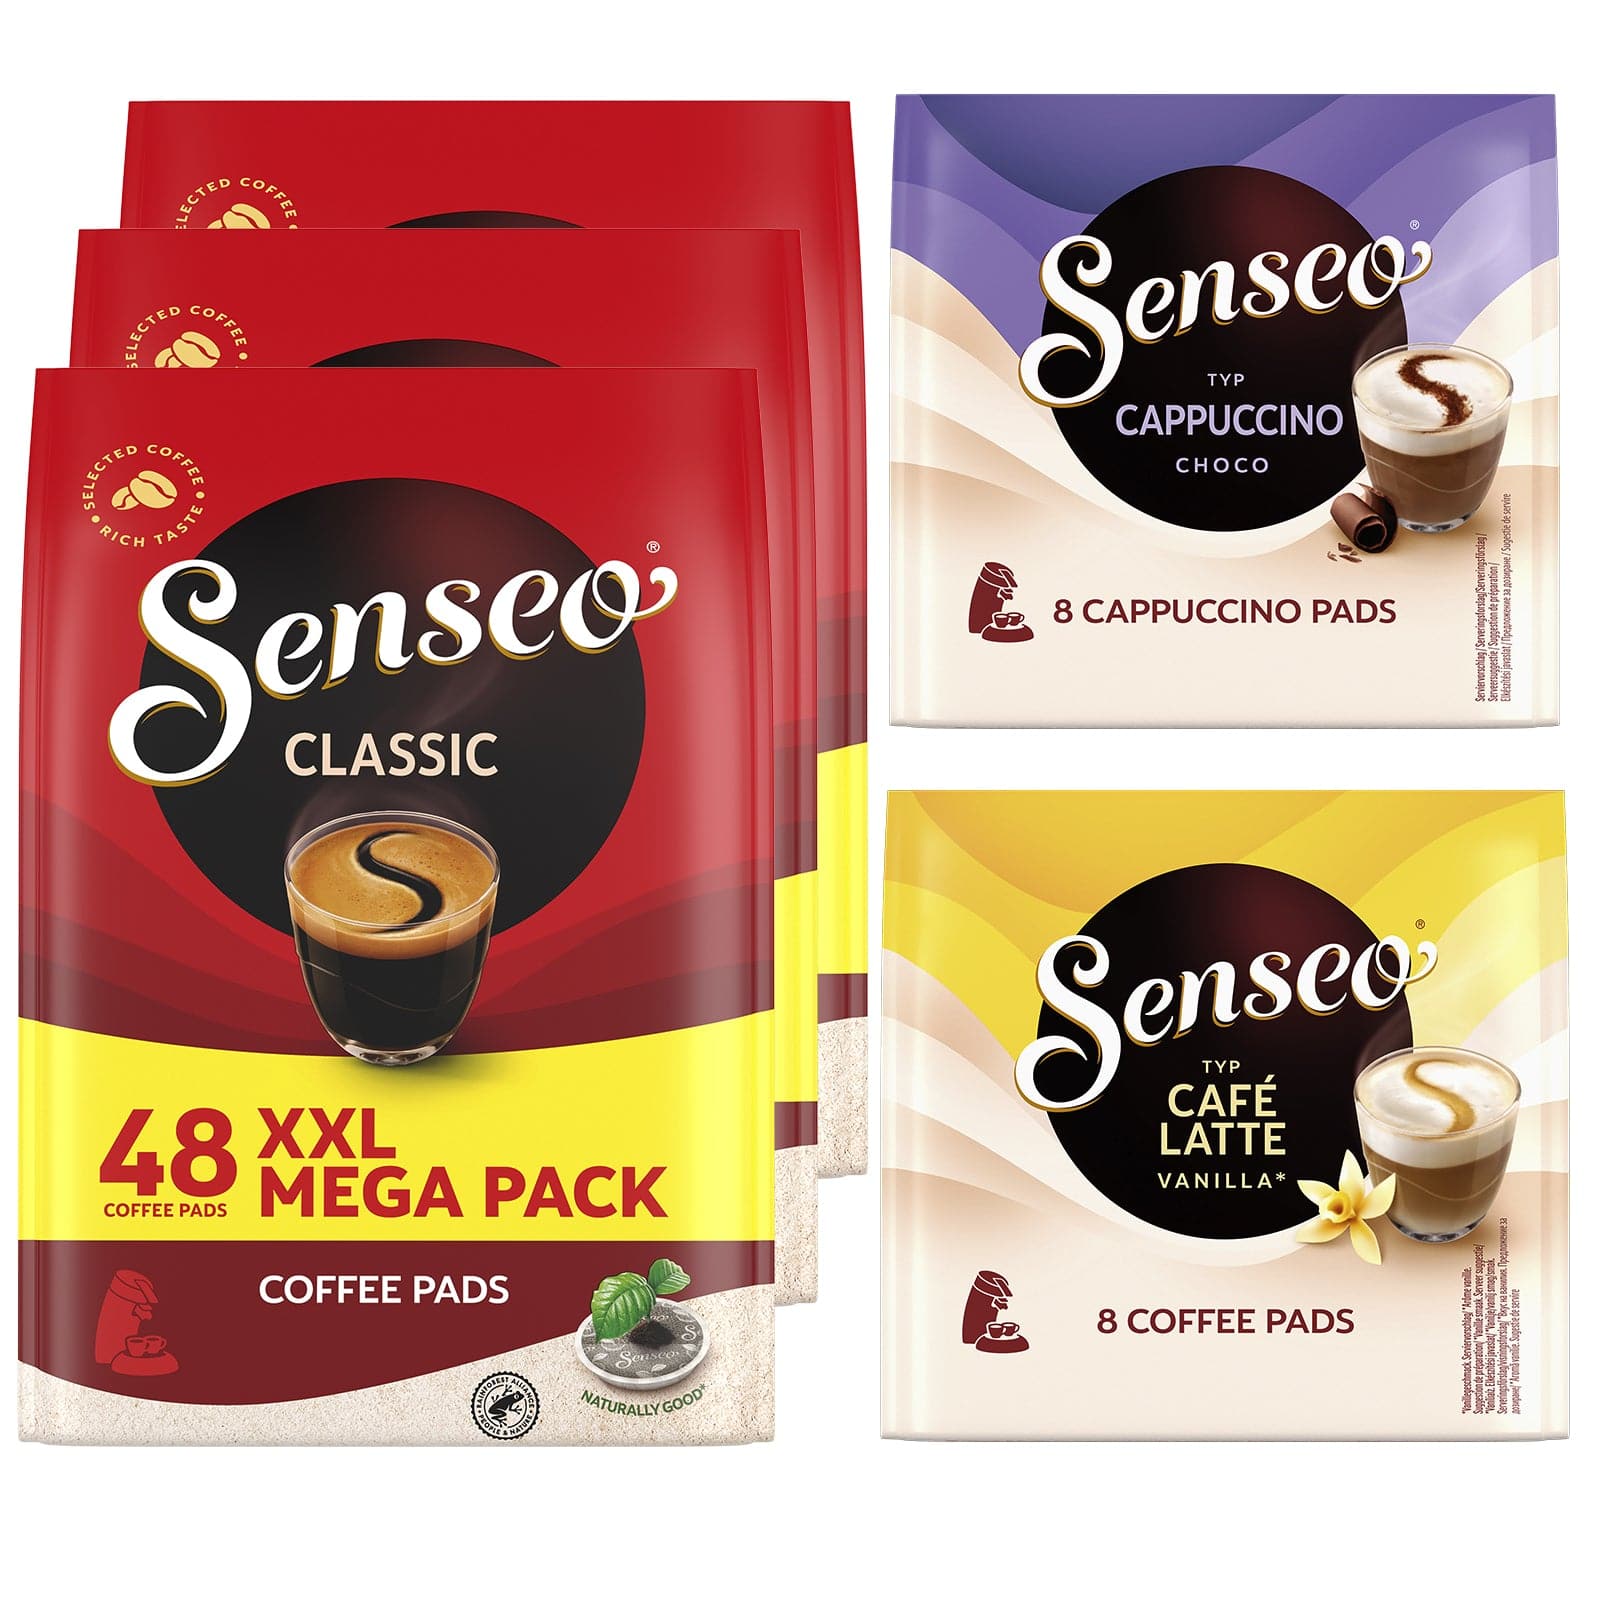 Senseo Caramel Cappuccino Coffee Pods- Single Serve Coffee Pods Bulk Pack for Senseo Coffee Machine - Compostable Coffee Pods for Hot or Iced Coffee